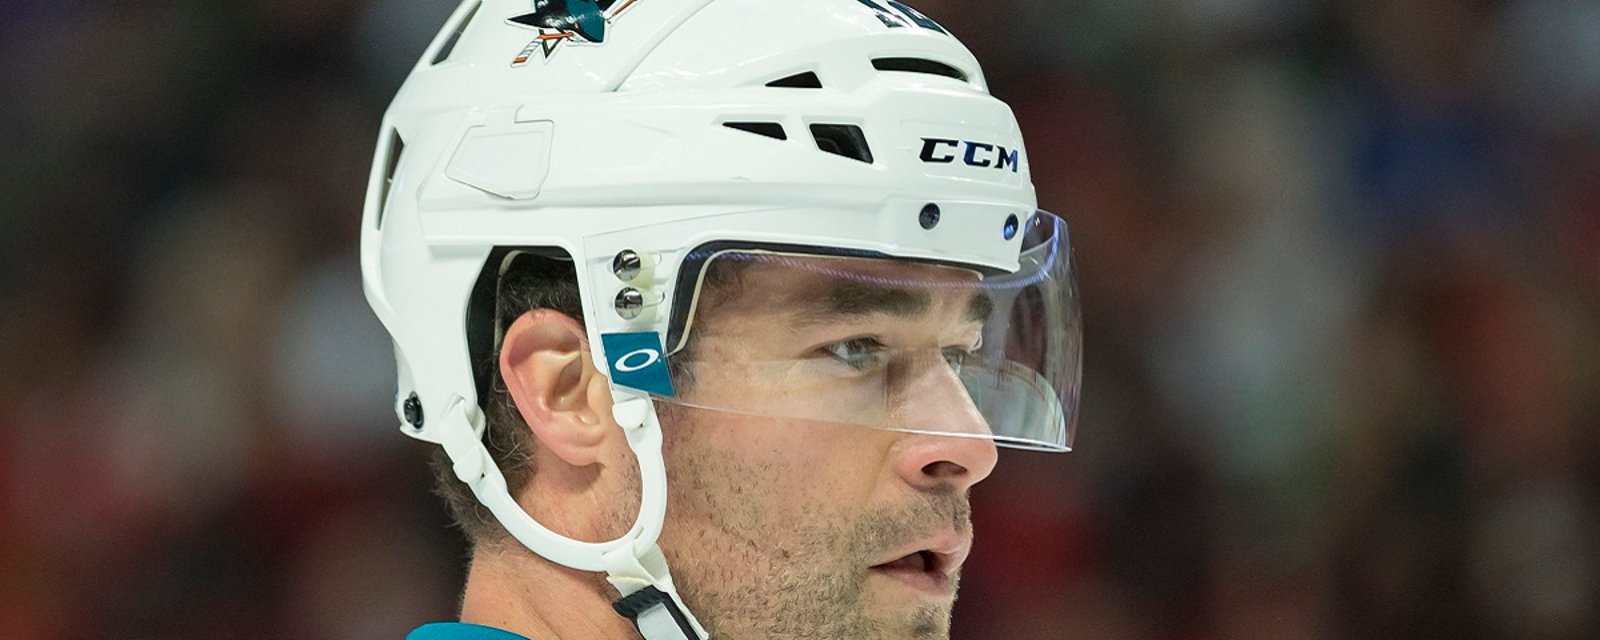 Breaking: Patrick Marleau spotted in Leafs gear at the Sharks practice facility!